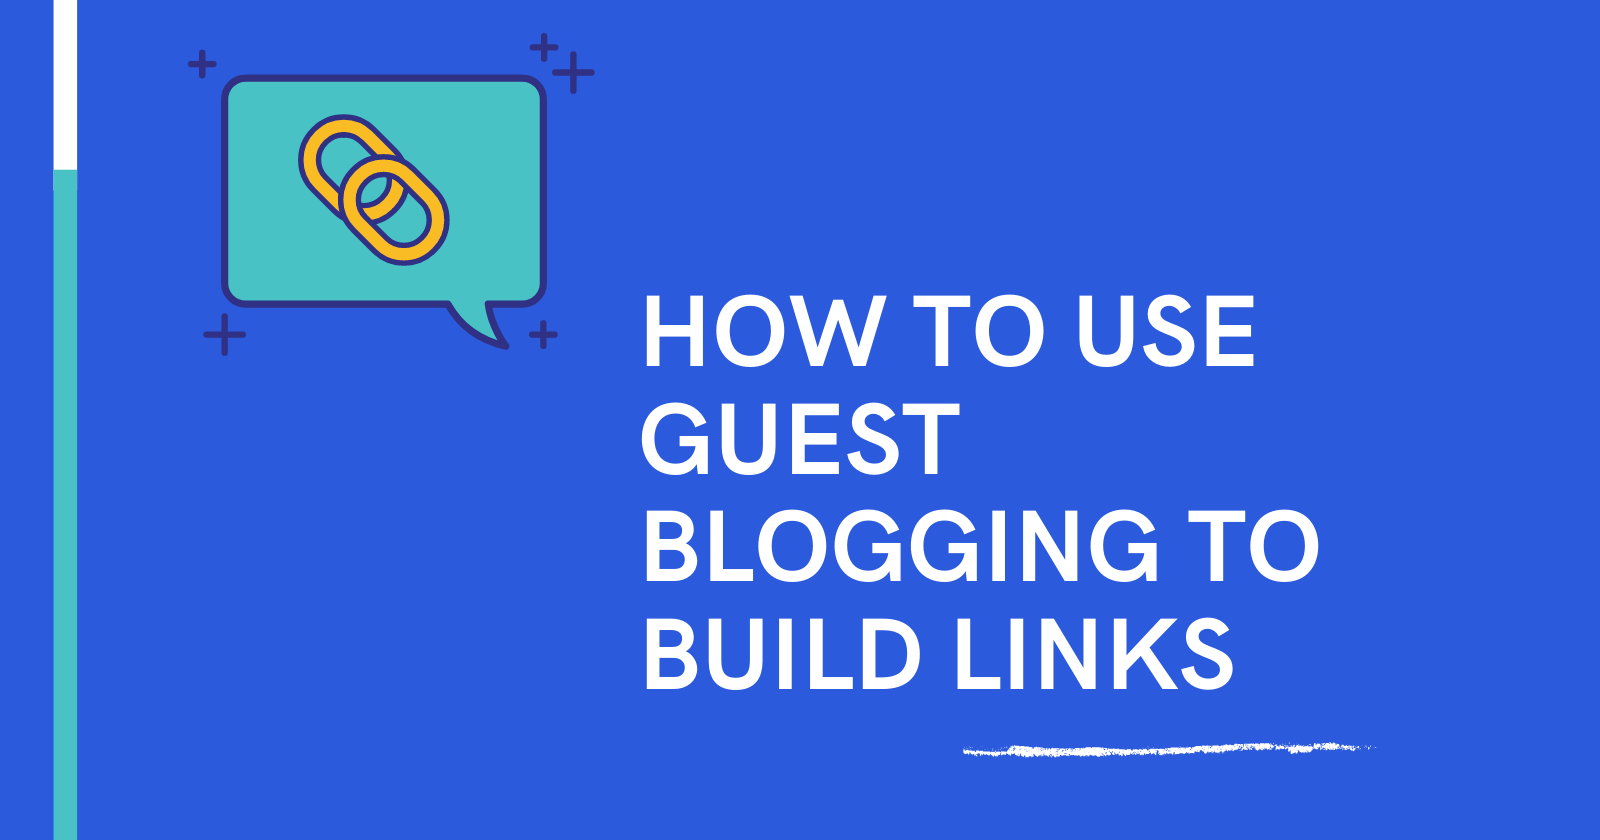 How Long Does It Take To See Results From Link Building?